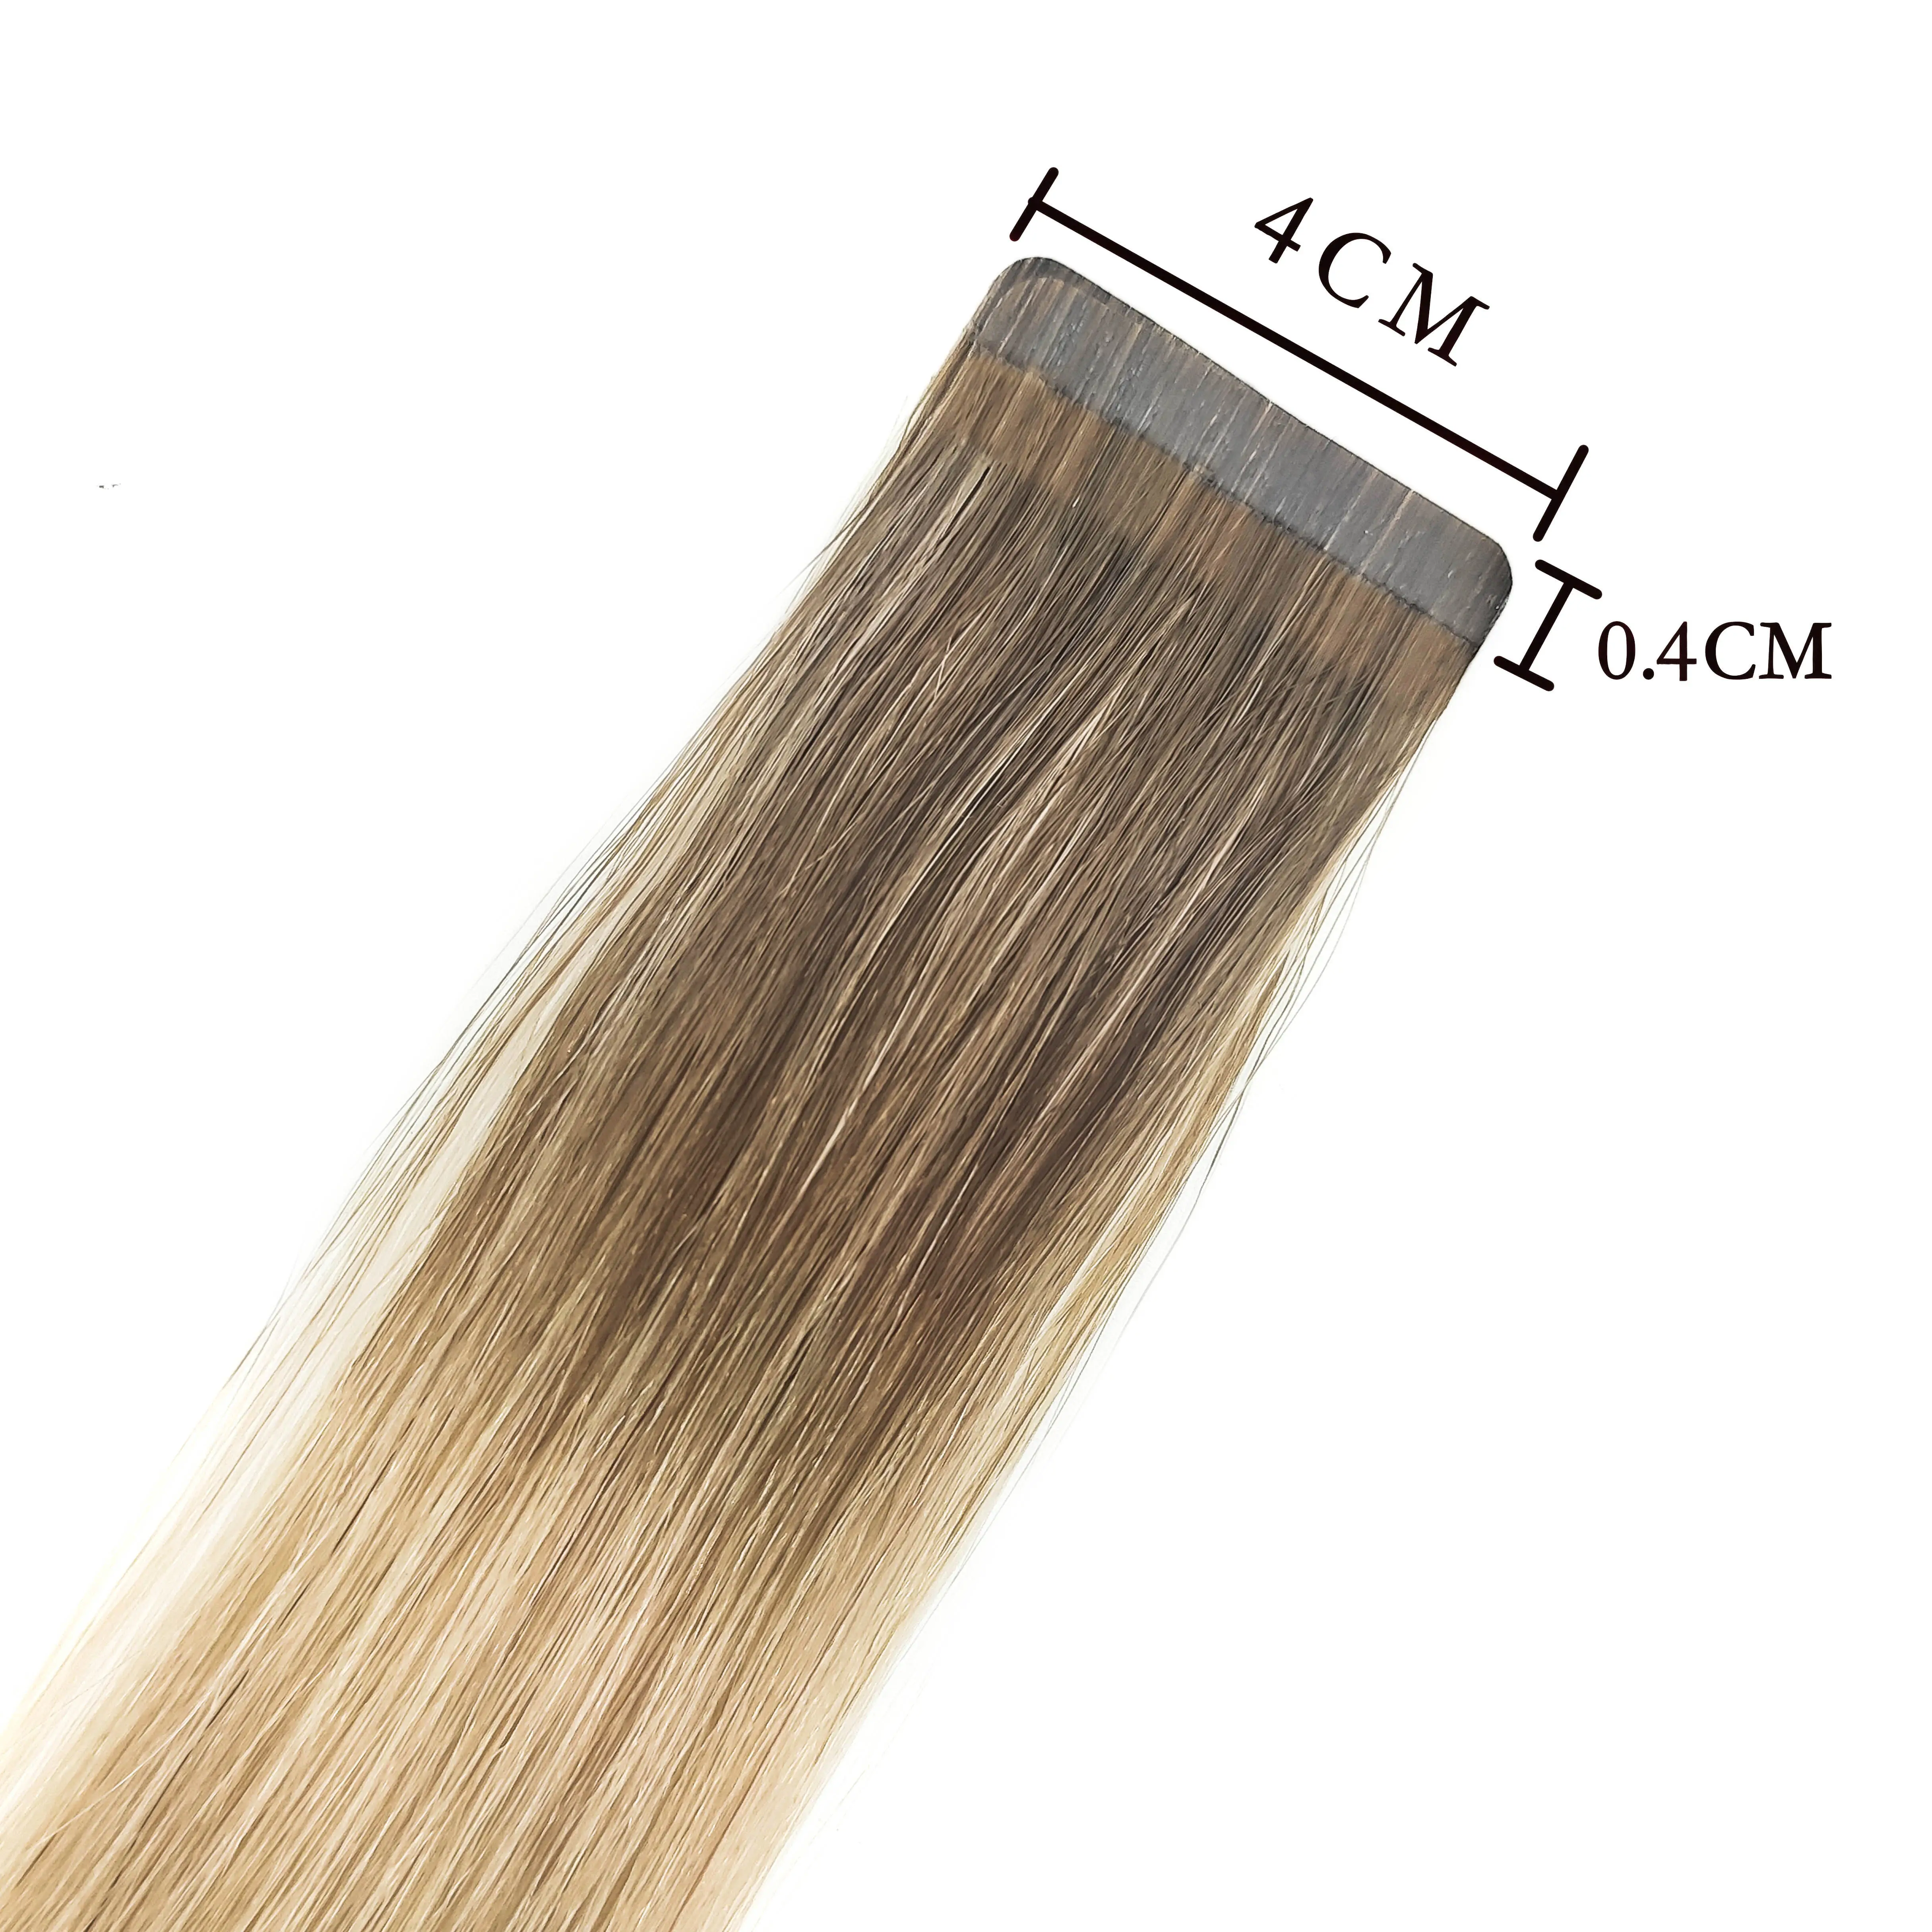 Seamless Drawn Virgin Remy Hair Ombre Blonde Tape in Human Hair Russian Tape in Hair Extensions Natural